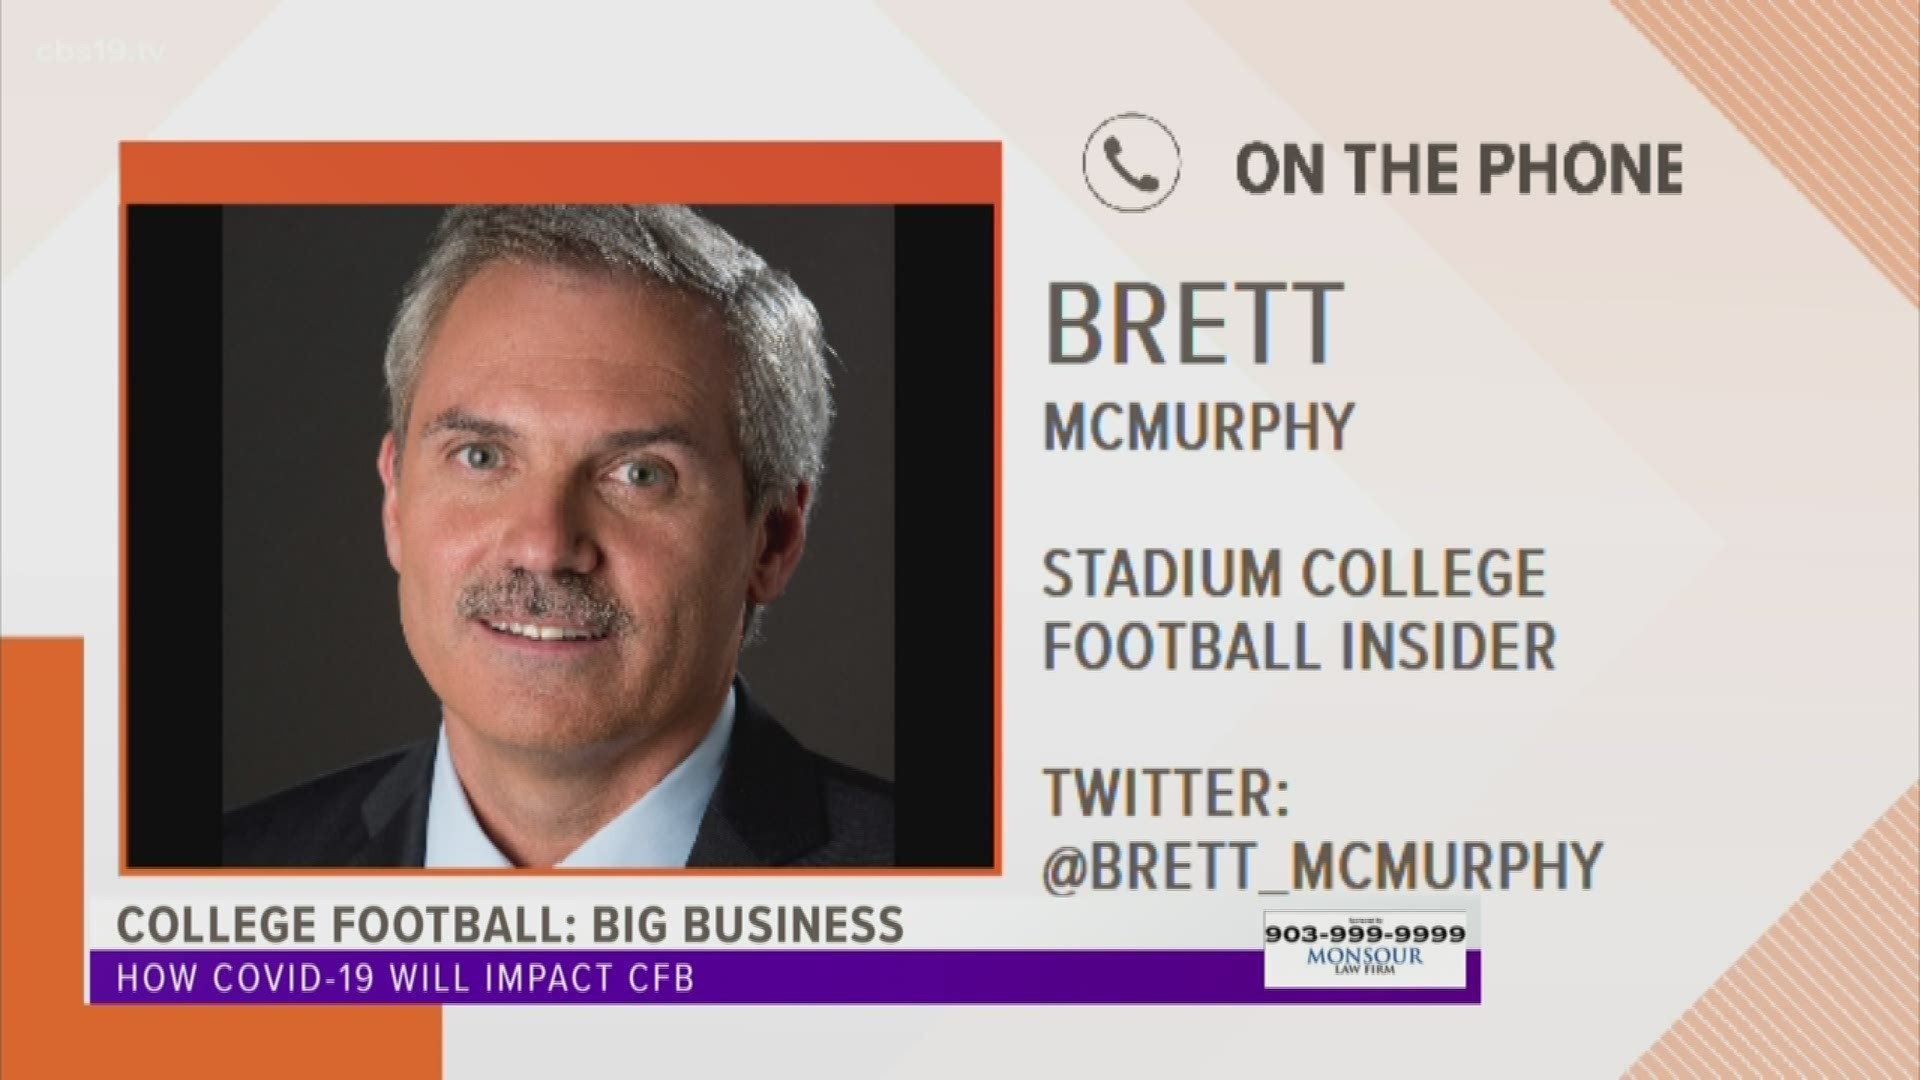 Brett McMurphy of the Stadium chats with Johnny Congdon about COVID-19's possible effect on college football.